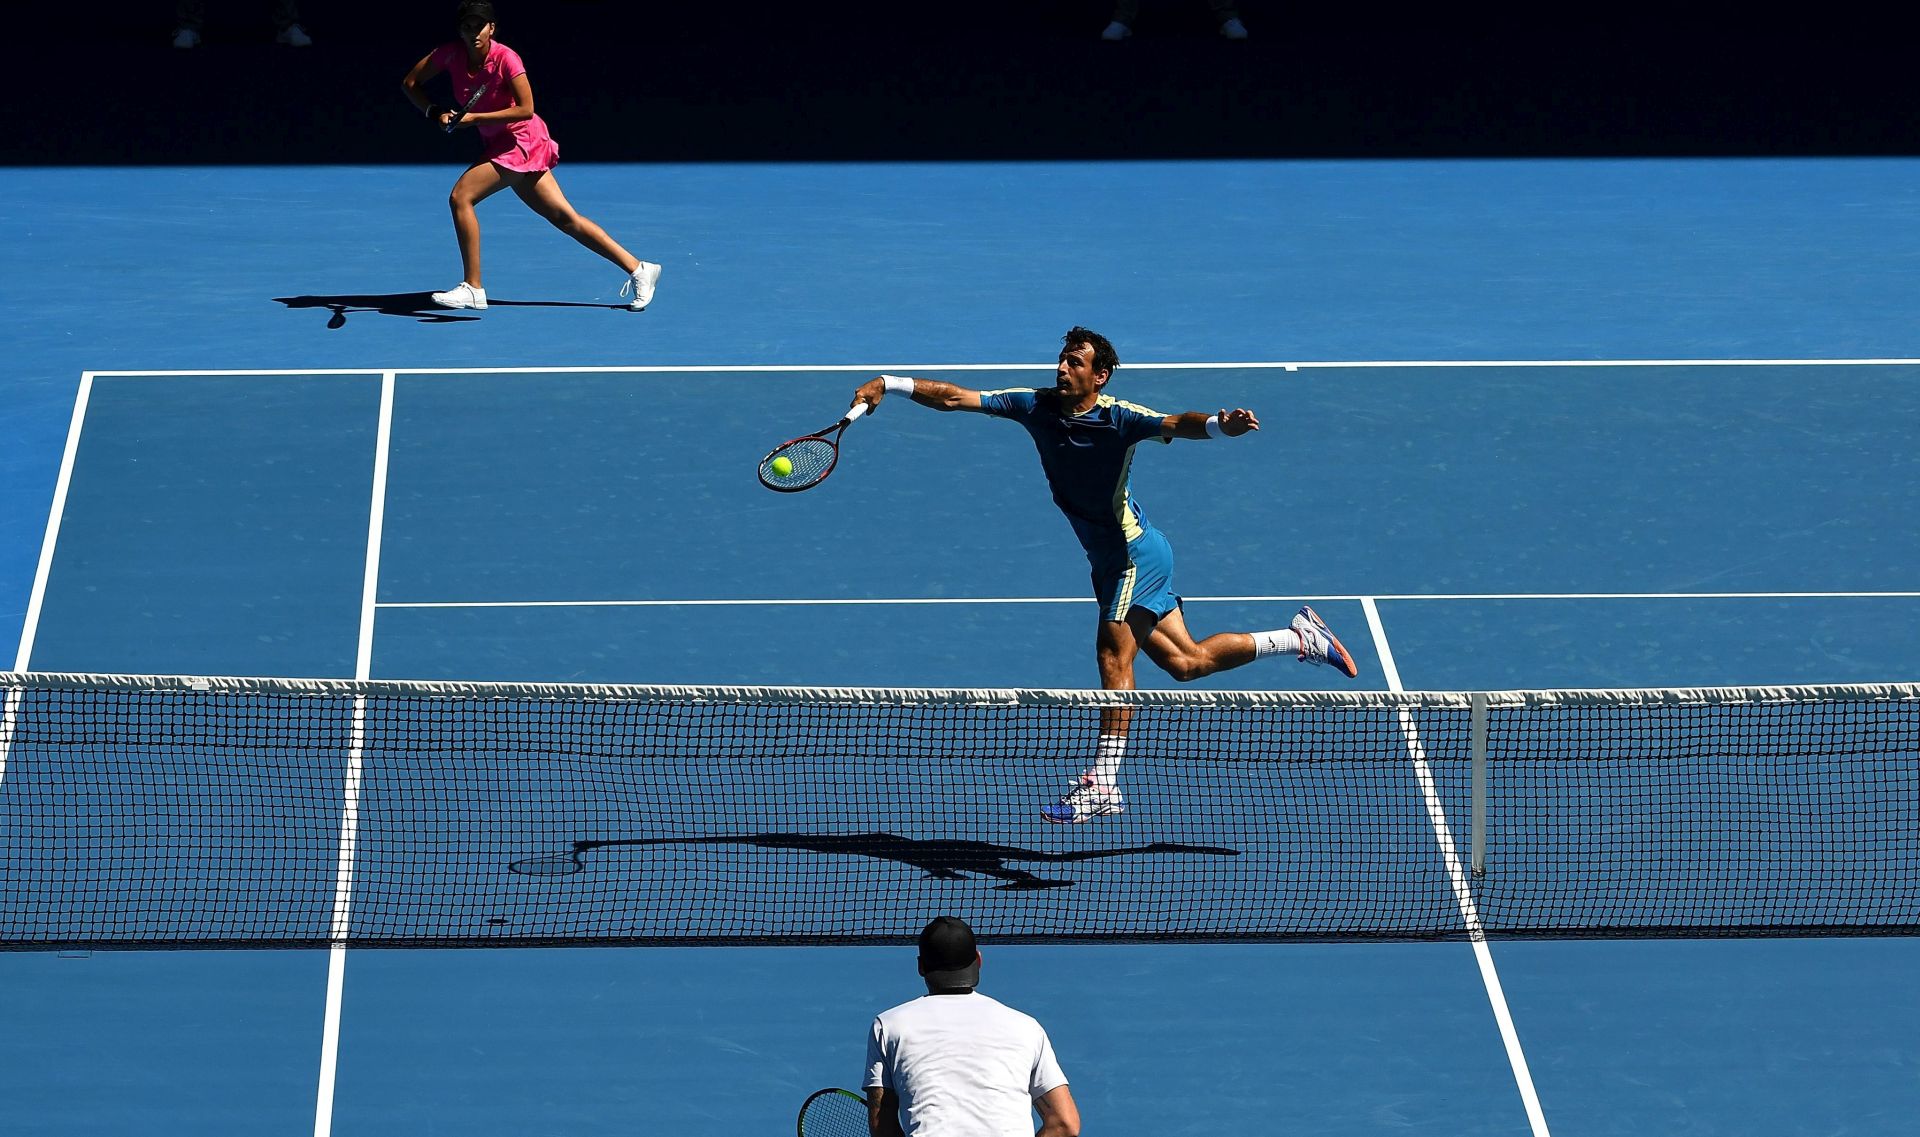 epa05753394 Sania Mirza (L) of India and Ivan Dodig (R) of Croatia in action against Samantha Stosur and Sam Groth (C) of Australia during the Mixed Doubles semifinals match at the Australian Open Grand Slam tennis tournament in Melbourne, Australia, 27 January 2017.  EPA/TRACEY NEARMY AUSTRALIA AND NEW ZEALAND OUT